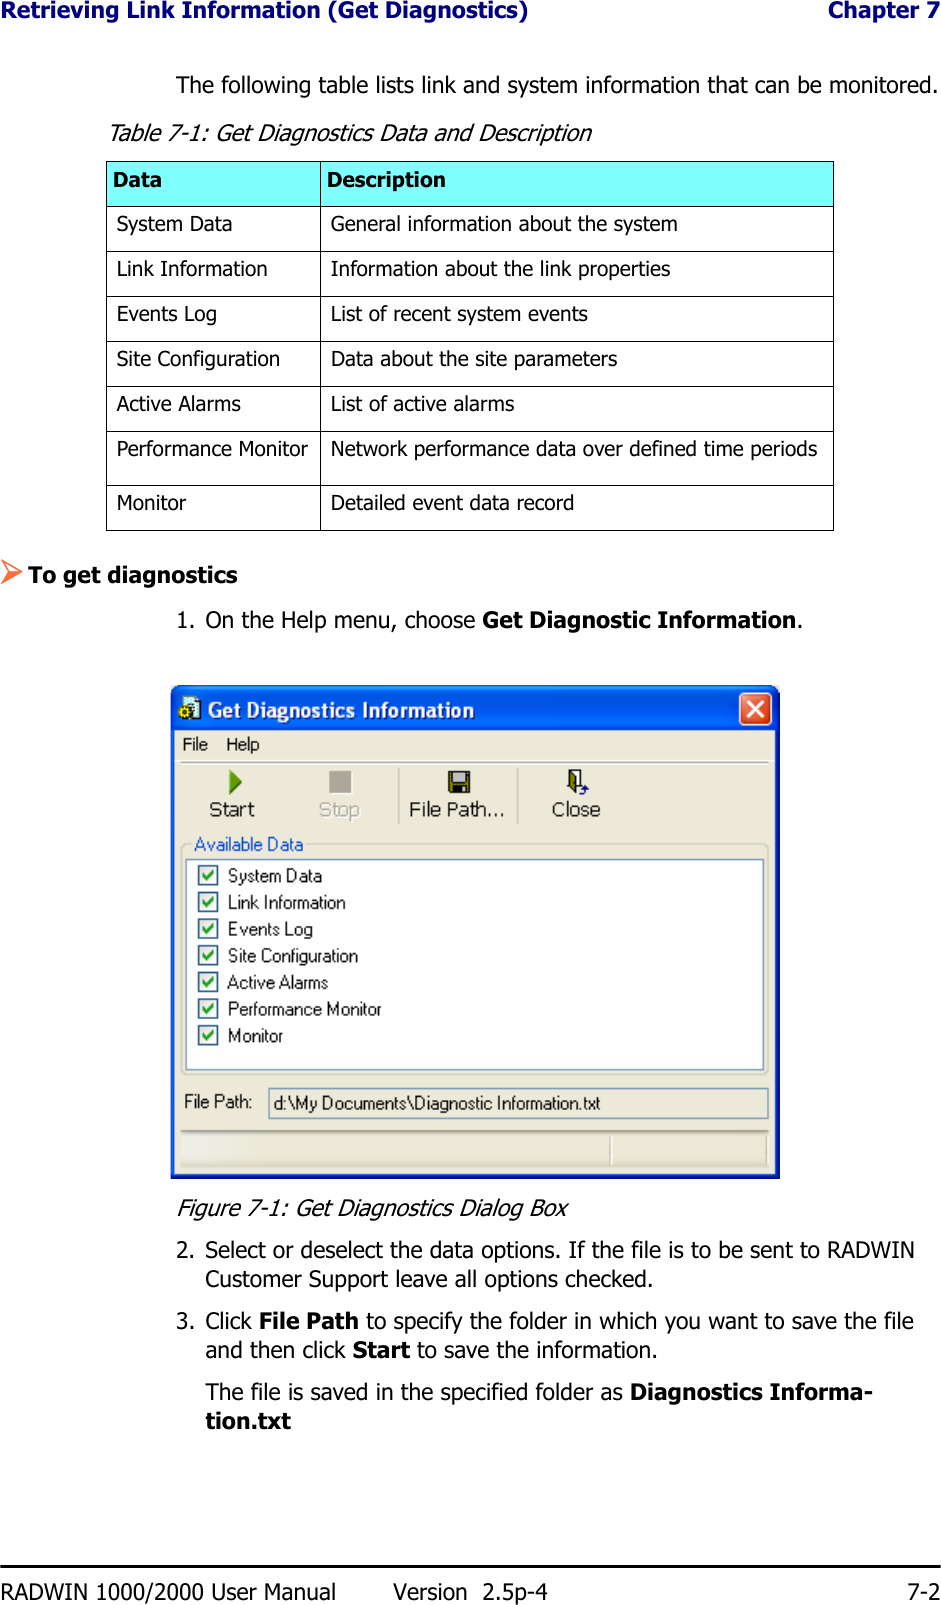 Retrieving Link Information (Get Diagnostics)  Chapter 7RADWIN 1000/2000 User Manual Version  2.5p-4 7-2The following table lists link and system information that can be monitored.¾To get diagnostics1. On the Help menu, choose Get Diagnostic Information.Figure 7-1: Get Diagnostics Dialog Box2. Select or deselect the data options. If the file is to be sent to RADWIN Customer Support leave all options checked.3. Click File Path to specify the folder in which you want to save the file and then click Start to save the information.The file is saved in the specified folder as Diagnostics Informa-tion.txtTable 7-1: Get Diagnostics Data and DescriptionData DescriptionSystem Data General information about the systemLink Information Information about the link propertiesEvents Log List of recent system eventsSite Configuration Data about the site parametersActive Alarms List of active alarmsPerformance Monitor Network performance data over defined time periodsMonitor Detailed event data record